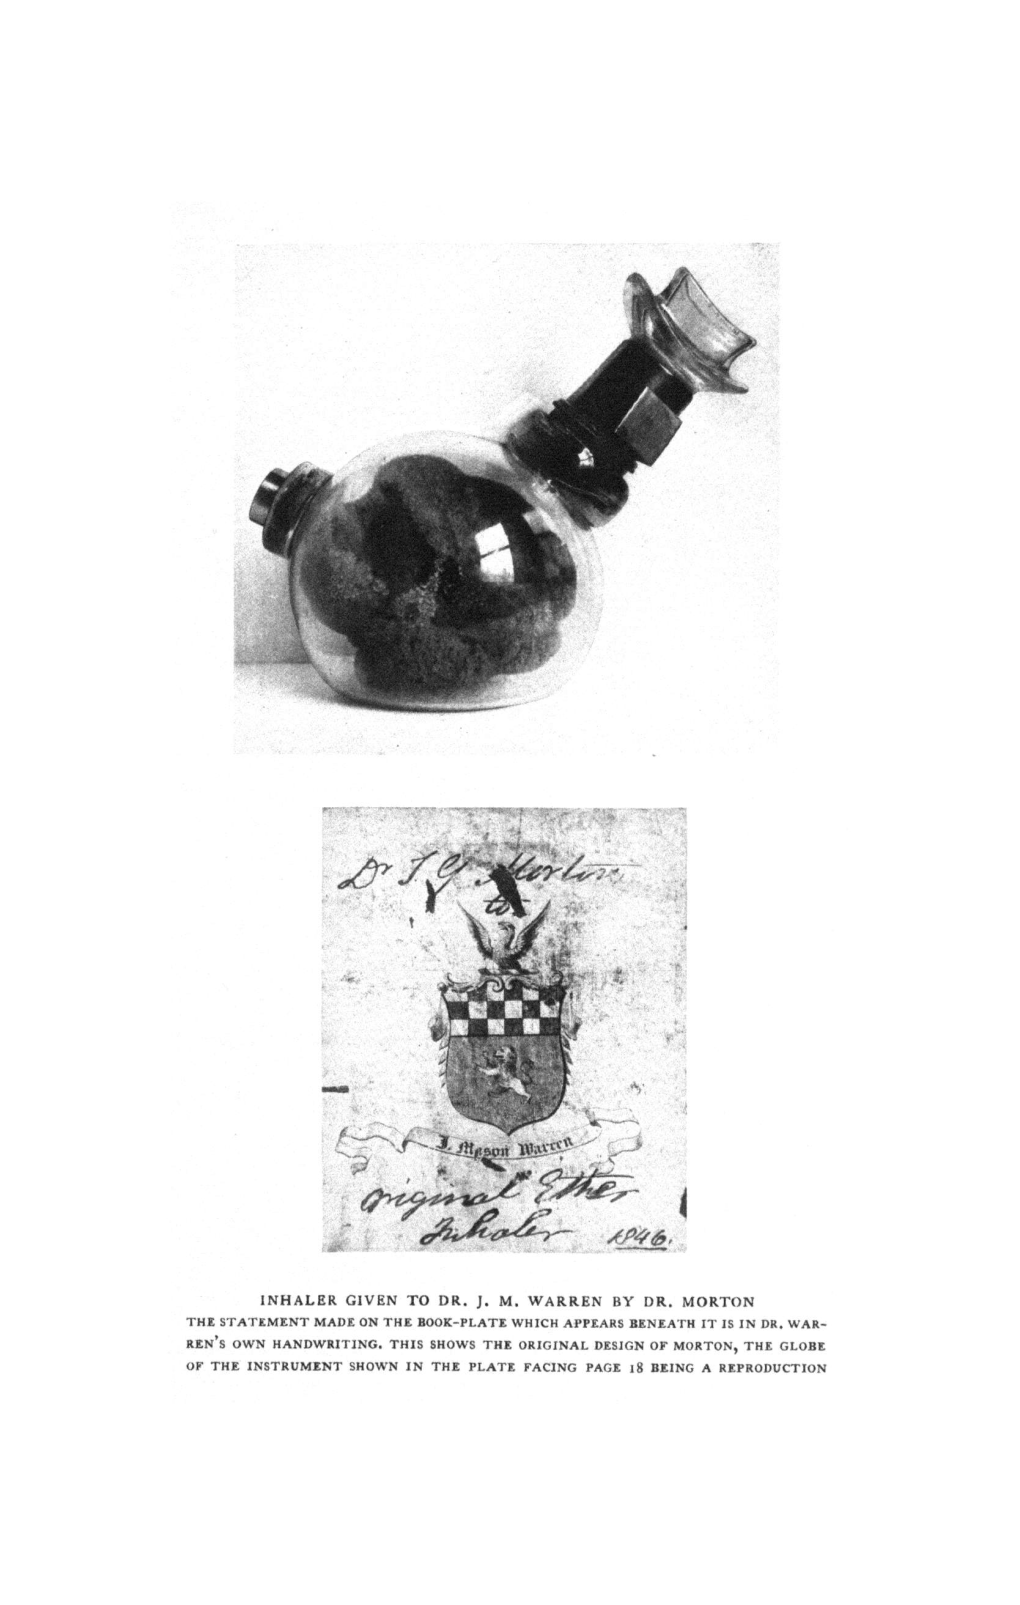 Inhaler Given to Dr. 3.M. Warren by Dr. Morton the Statement Made on the Book-Plate Which Appears Beneath It Is in Dr